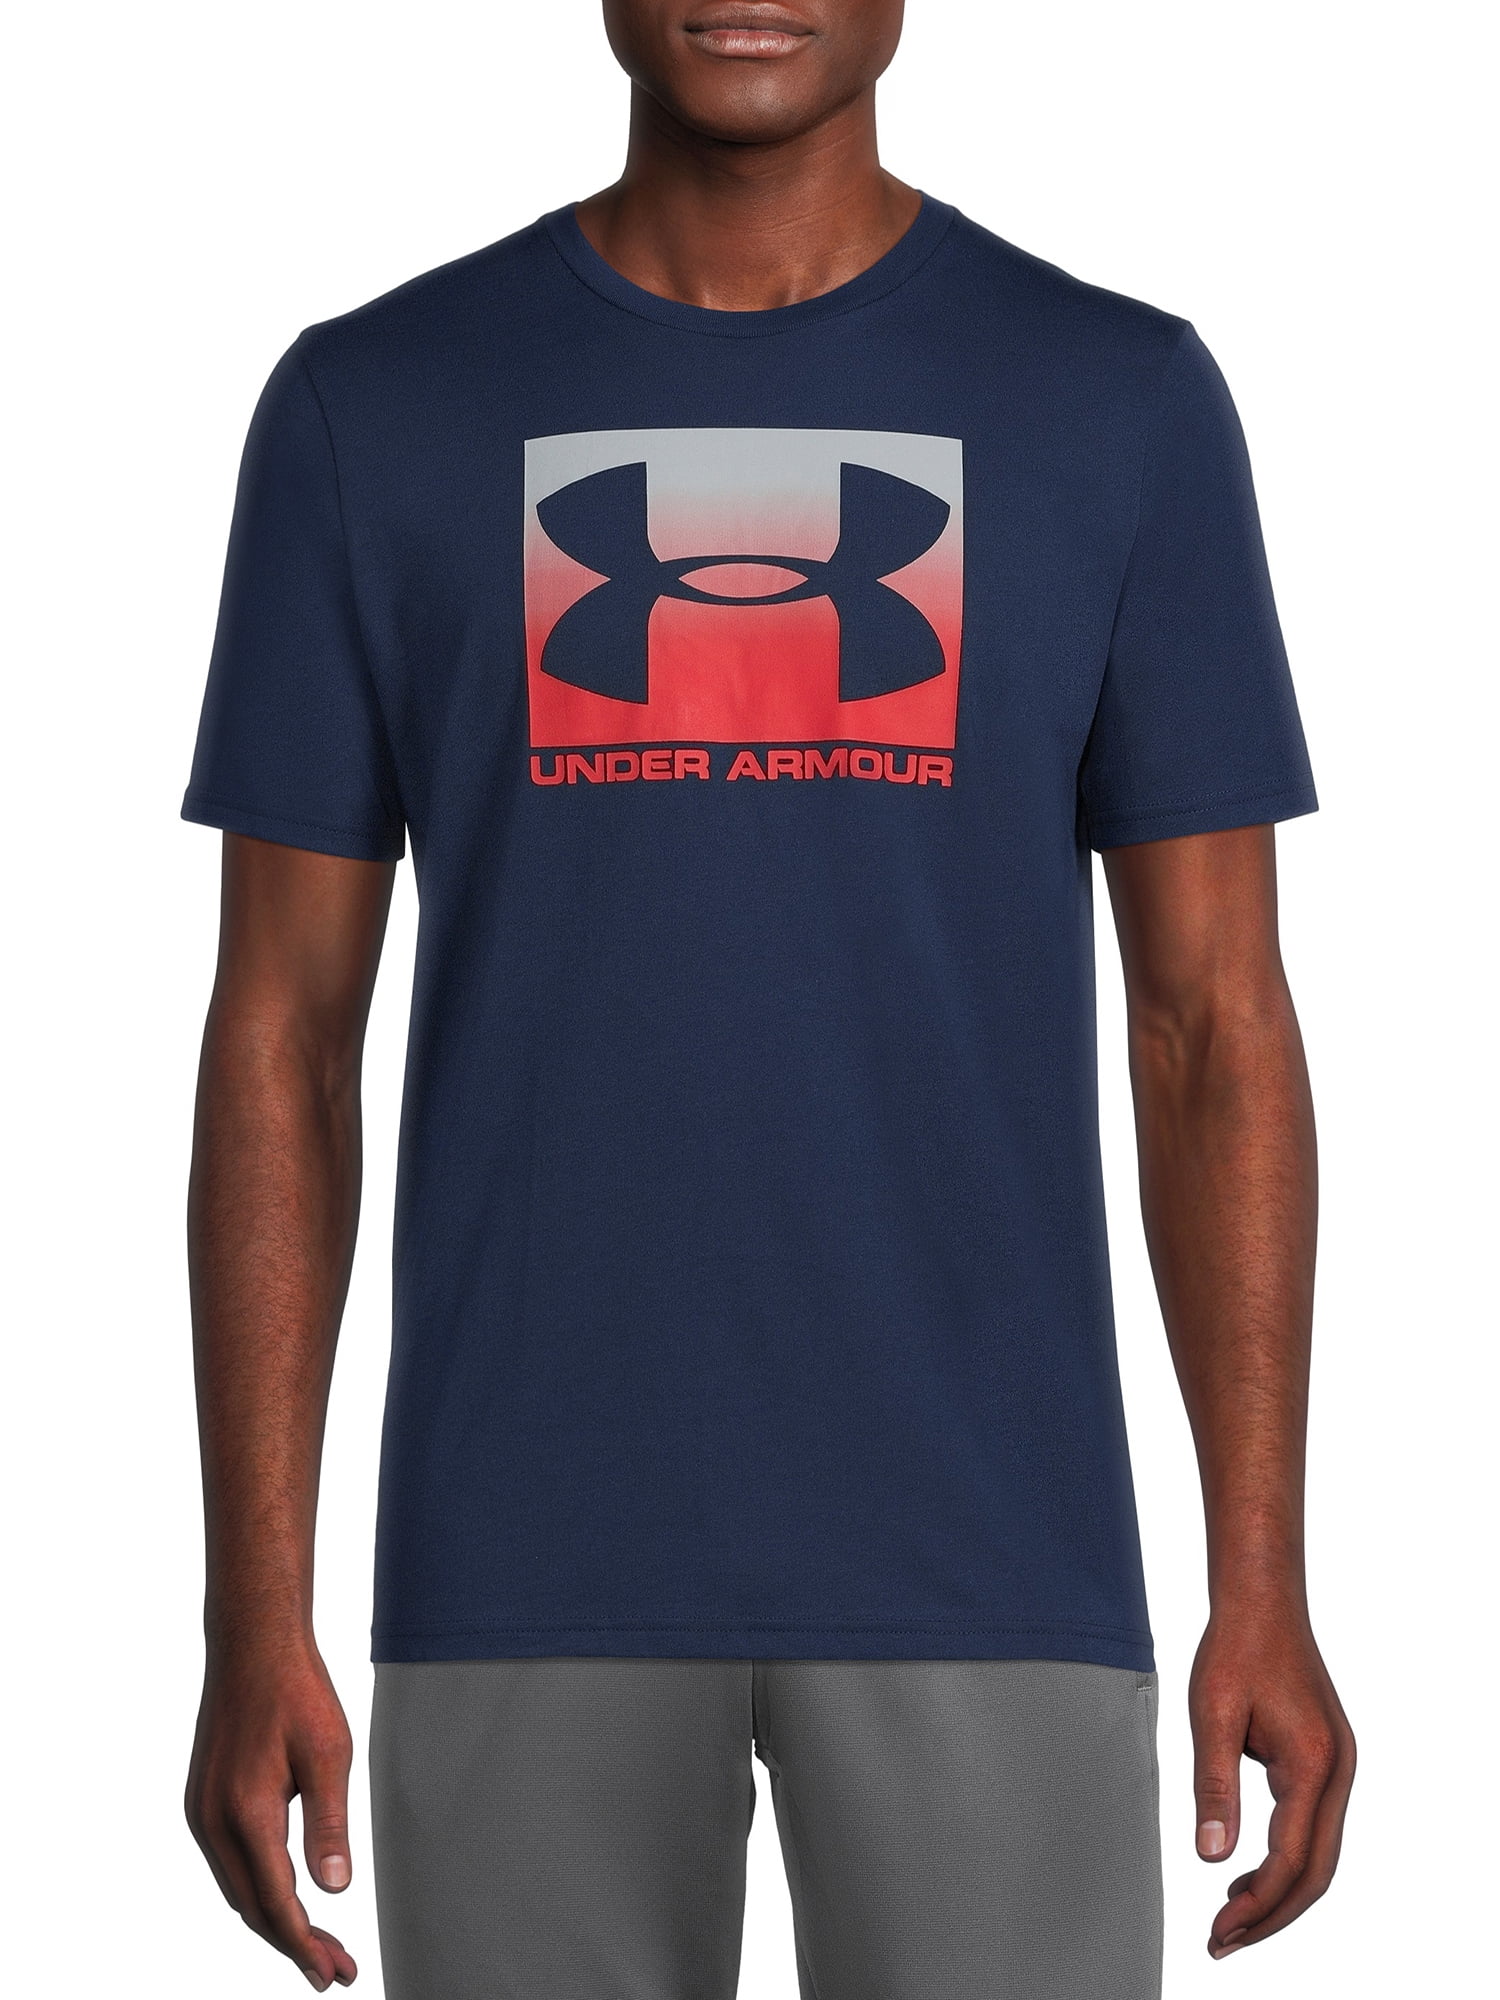 Under Armour Mens UA Boxed Sportstyle Charged Cotton Stretch SS T Shirt Tee 